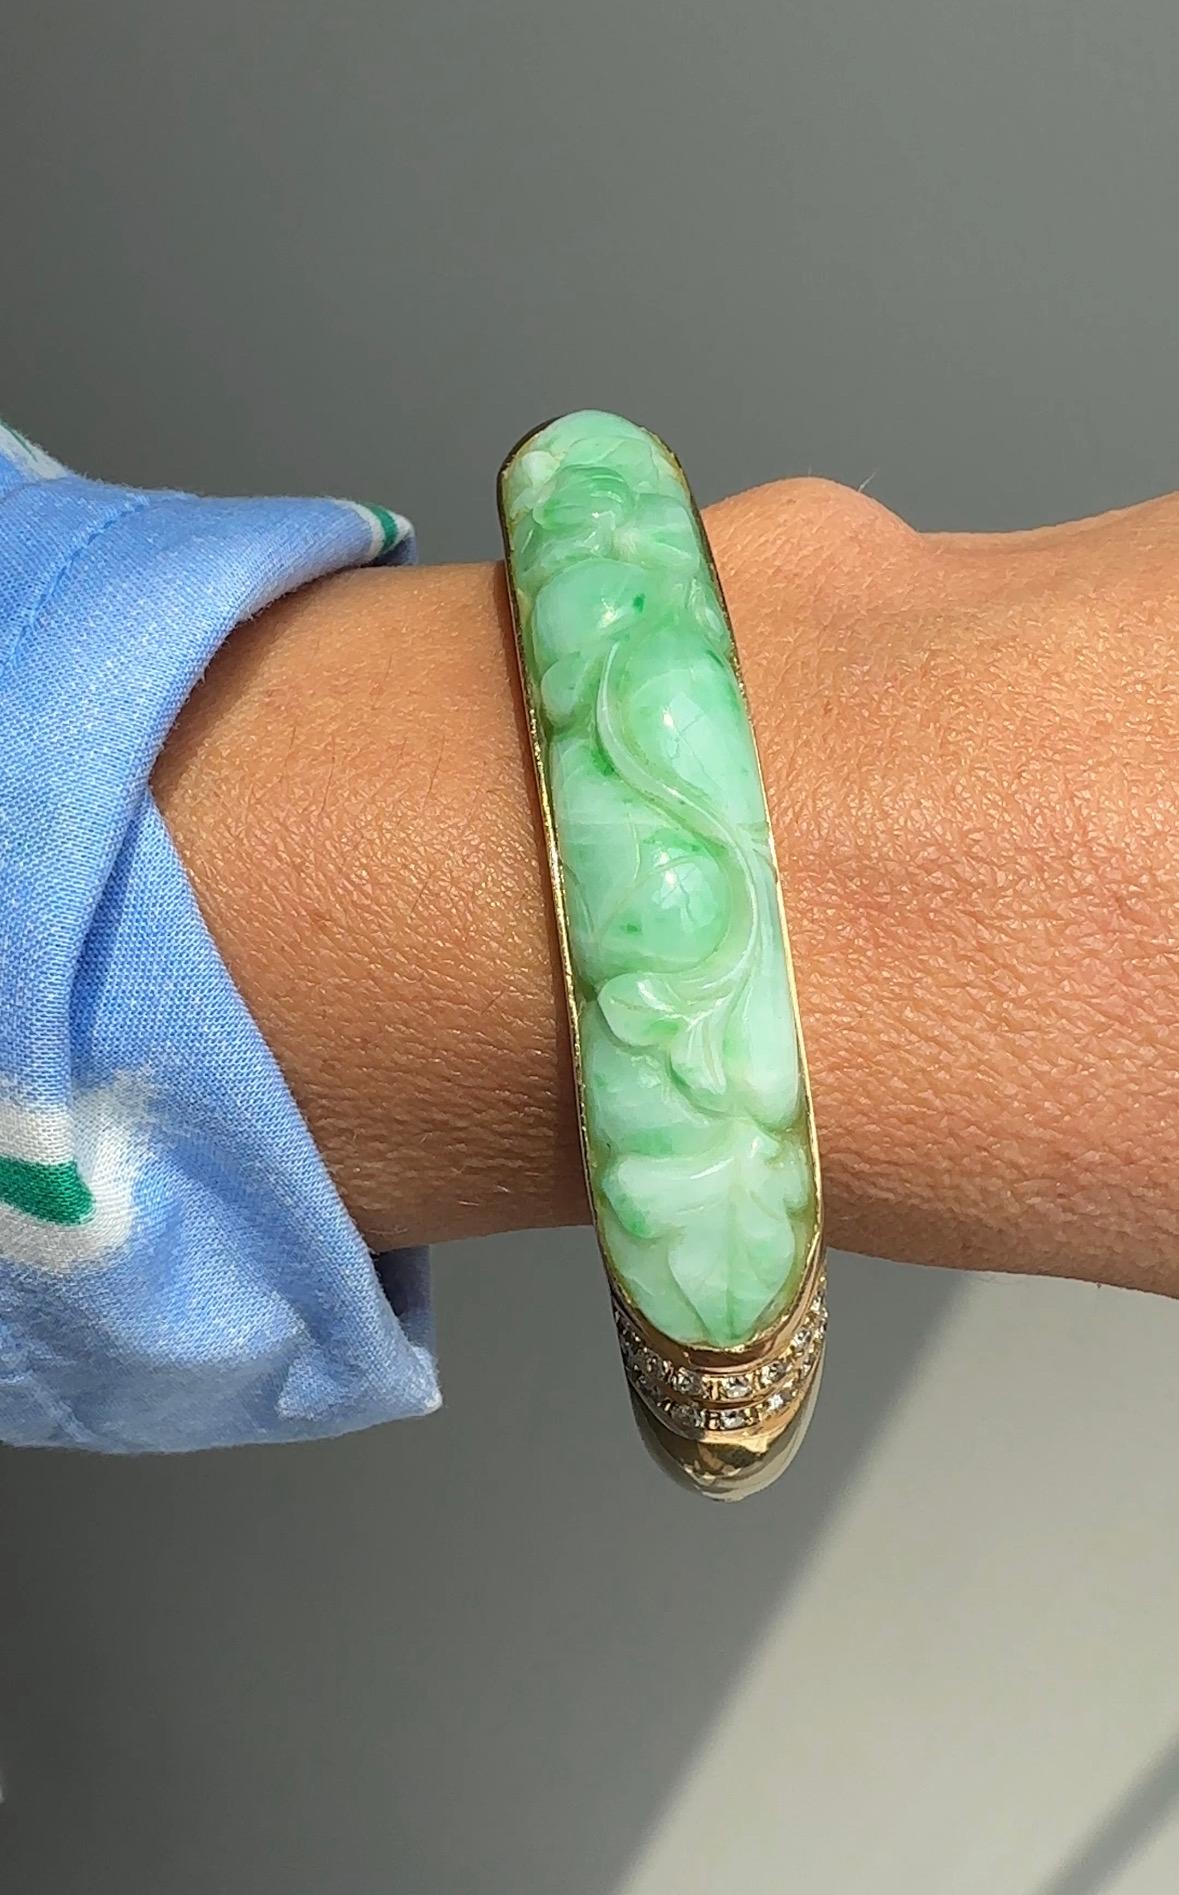 This striking mid-twentieth century bangle is chic modern design that contains a late 19th century jade carving. The vibrant apple green and white jade carving is presented in 14 karat yellow gold bangle with brilliant cut diamond accents.